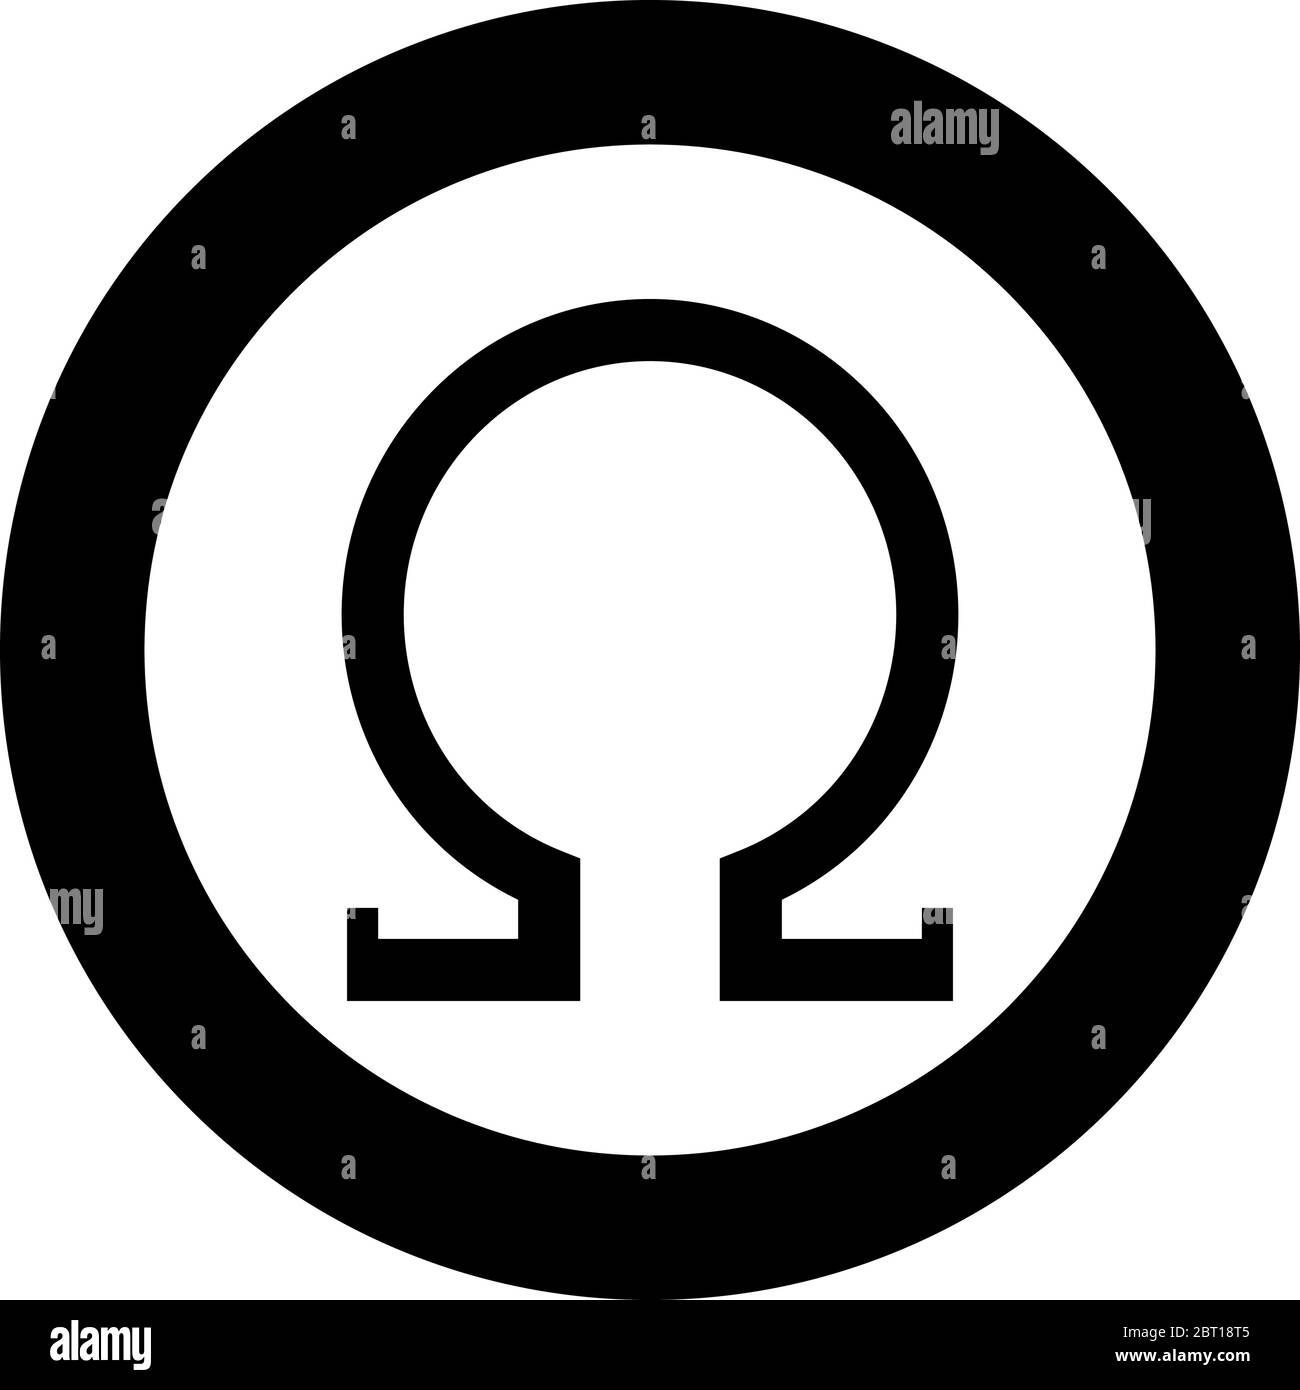 Omega greek symbol capital letter uppercase font icon in circle round black color vector illustration flat style simple image Stock Vector